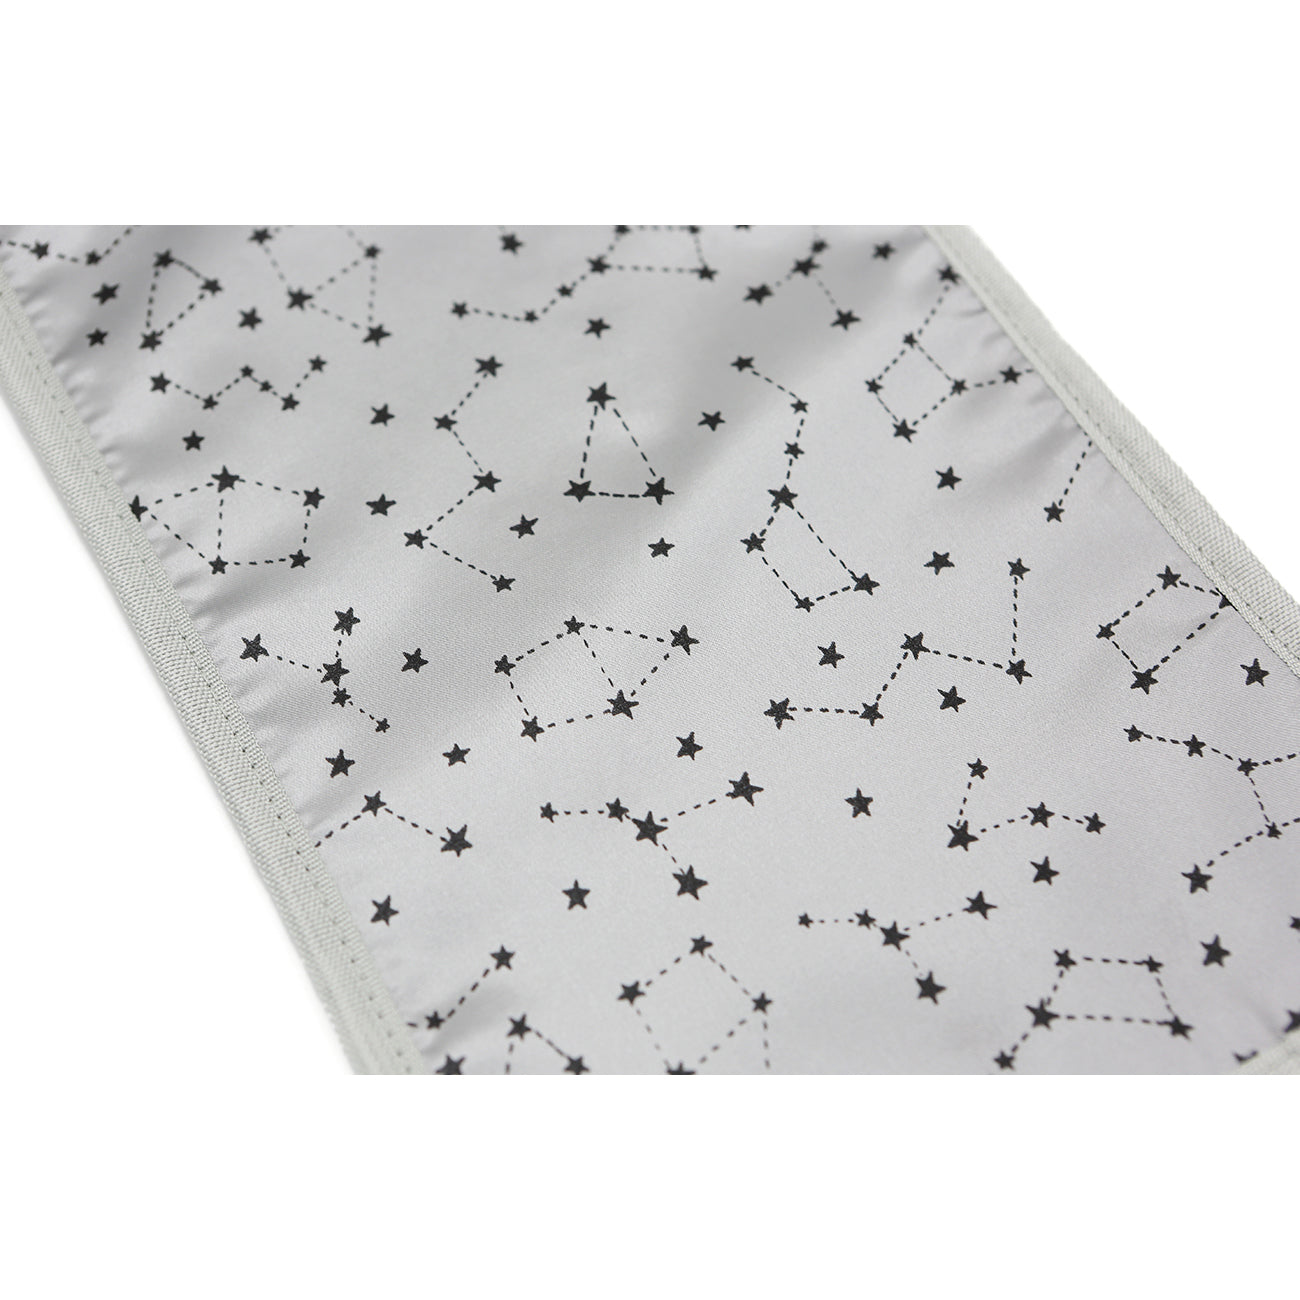 Ita bag constellations insert. The insert background is white with black stars and dotted constellations.